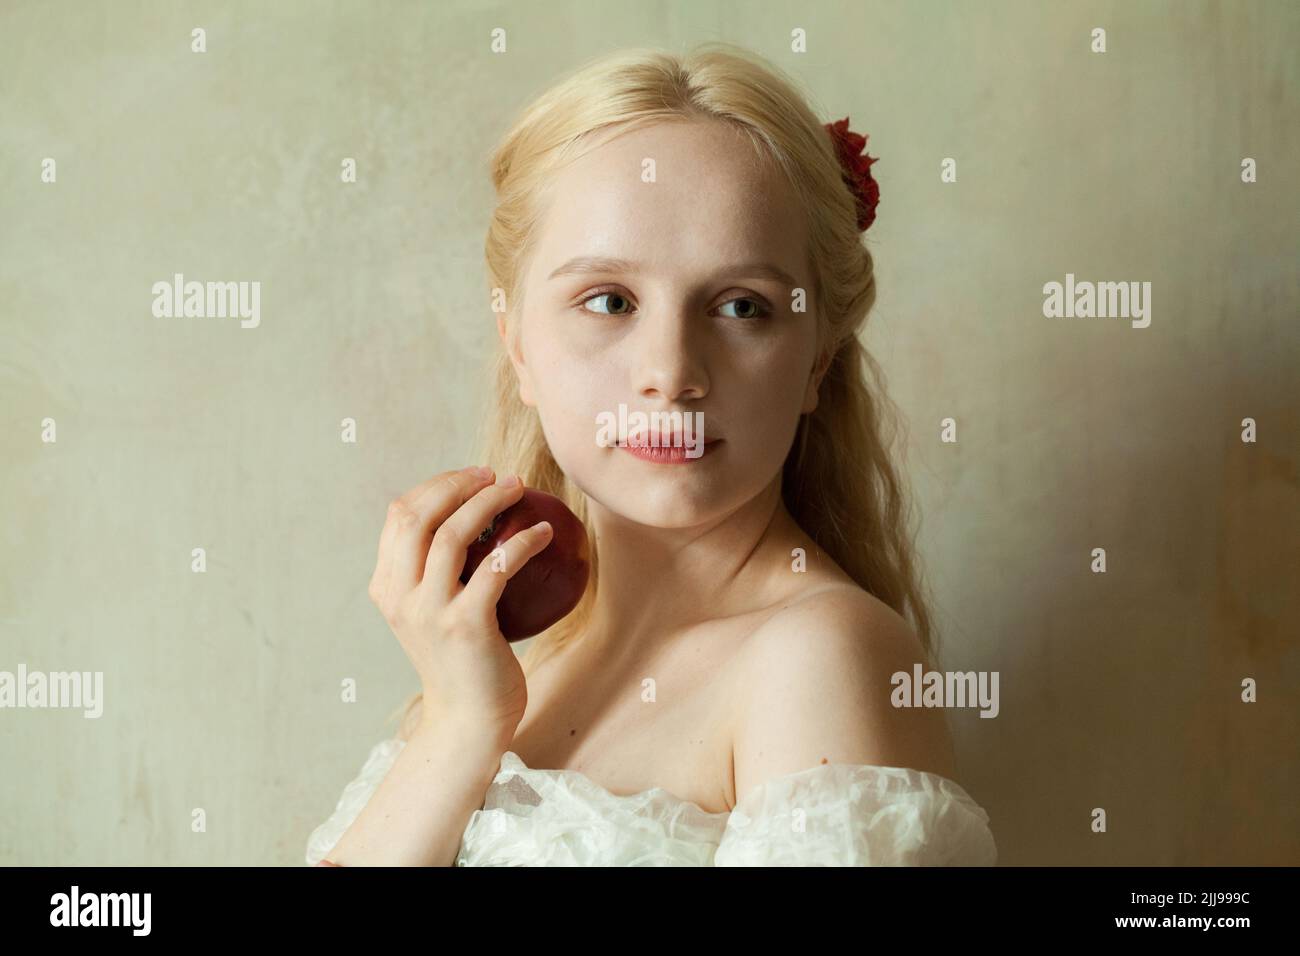 Portrait of cute blonde woman with red apple Stock Photo